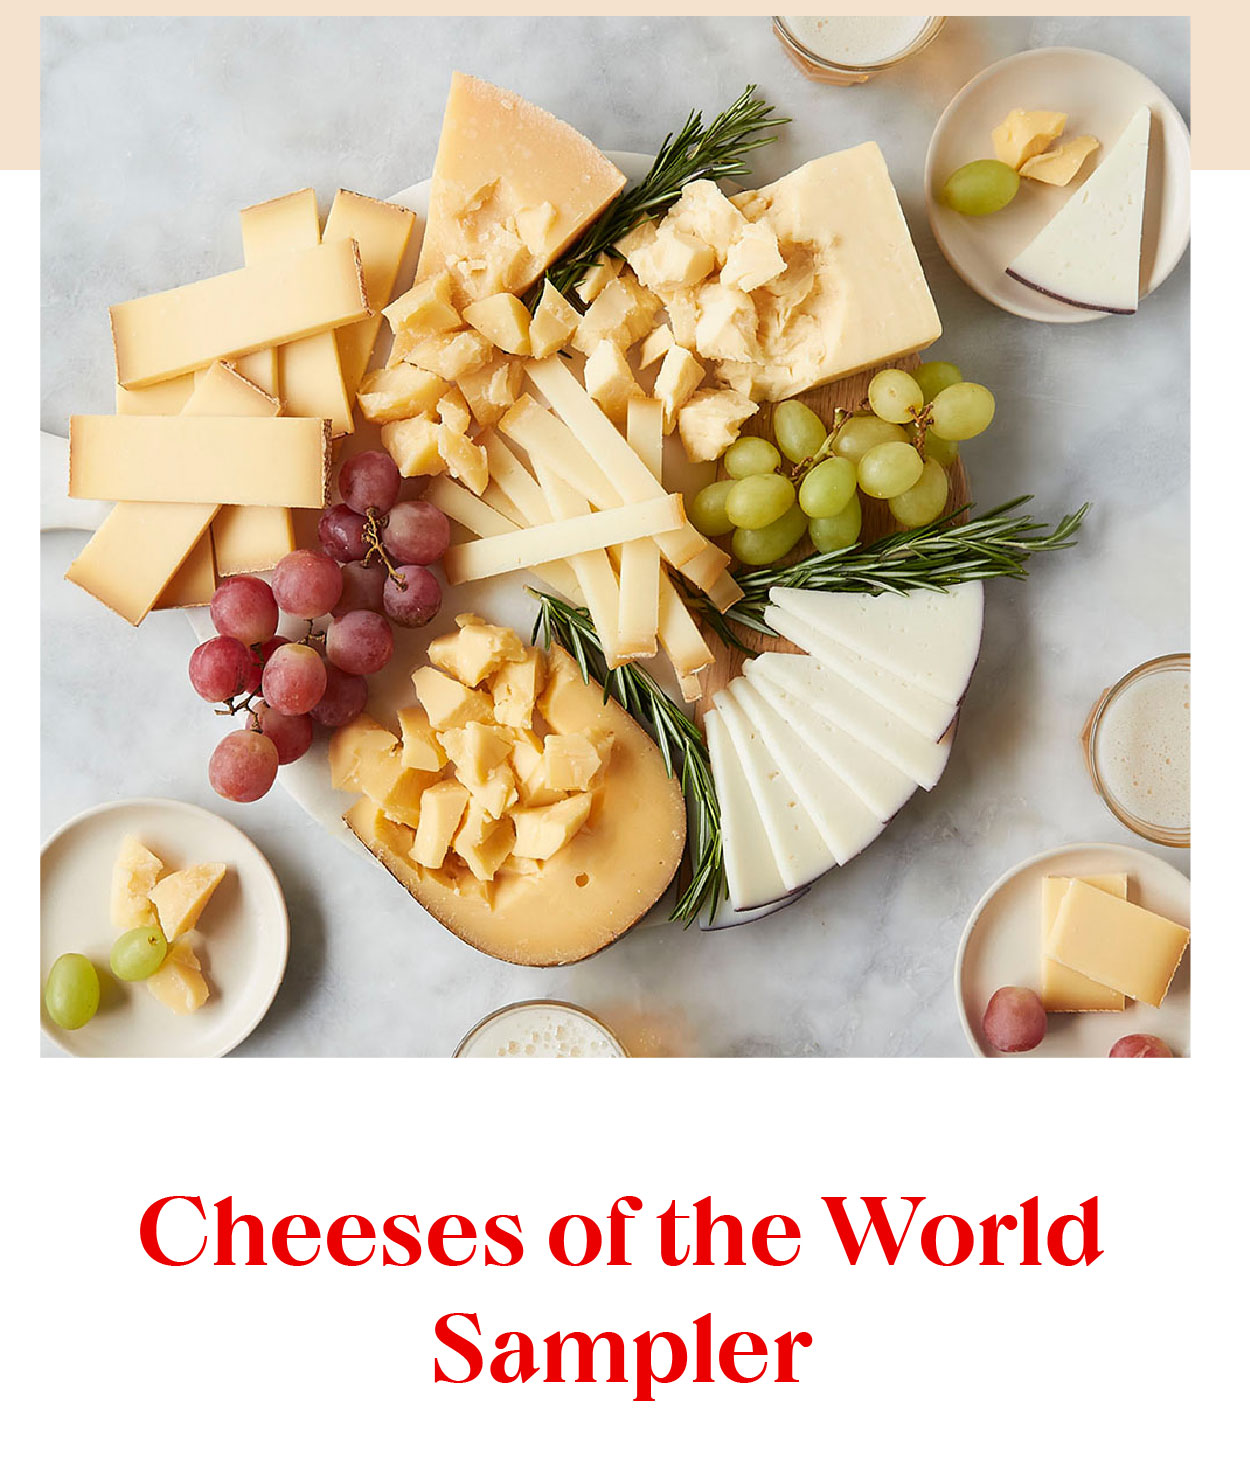 Cheeses of the World Sampler